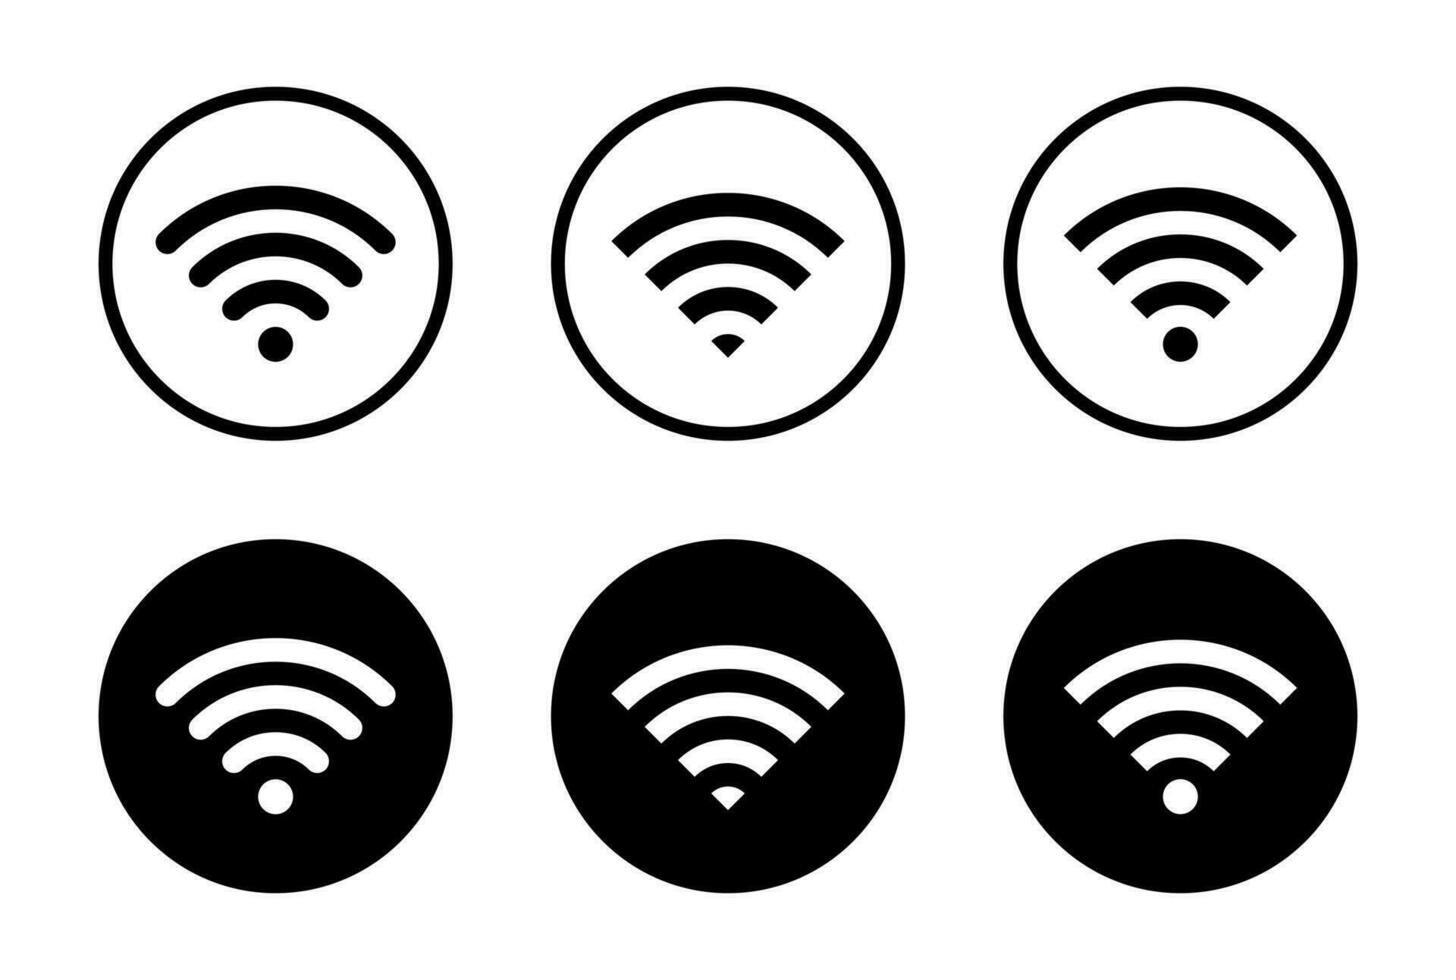 Wifi signal icon on black circle background. Wireless connection network symbol vector